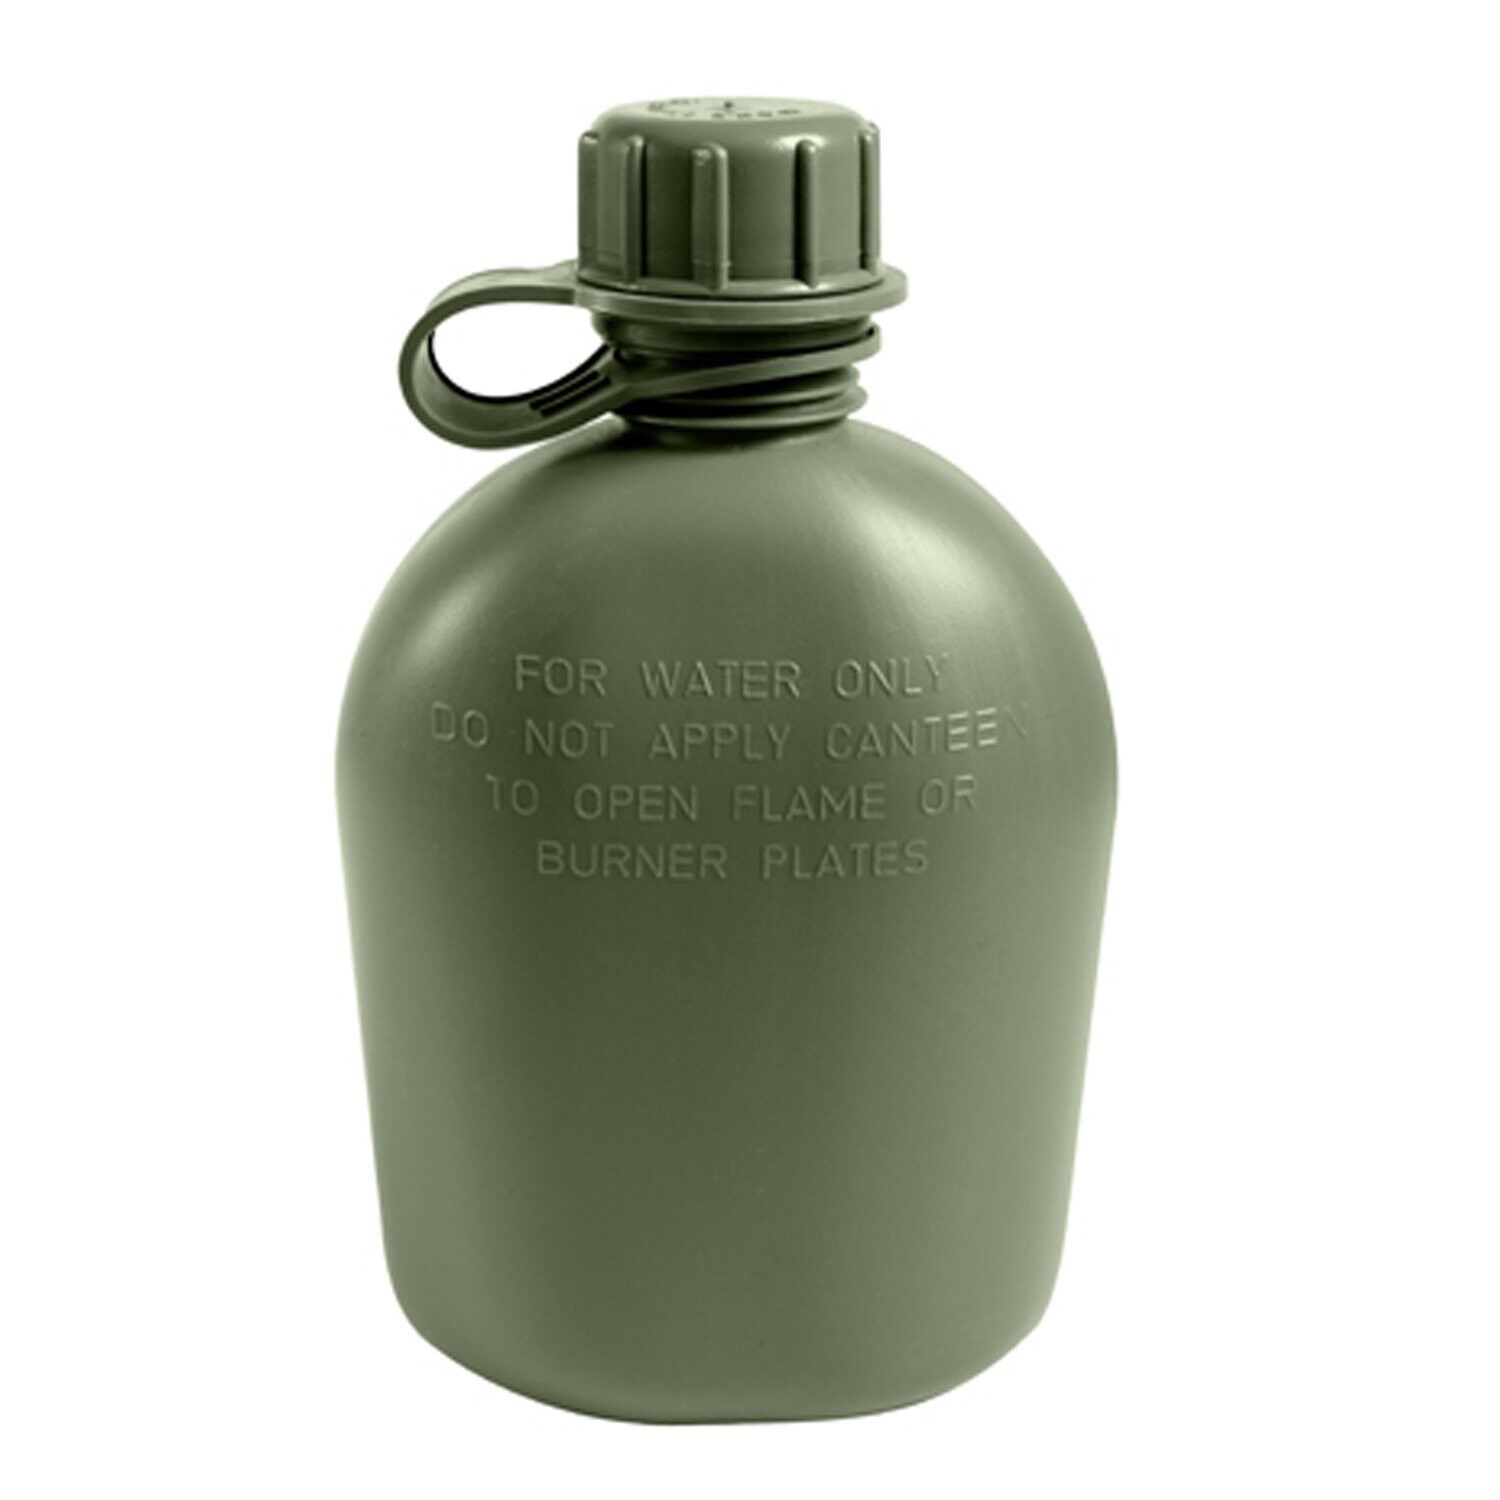 1 Quart Canteen Standard Issue Olive Drab Green - New - 